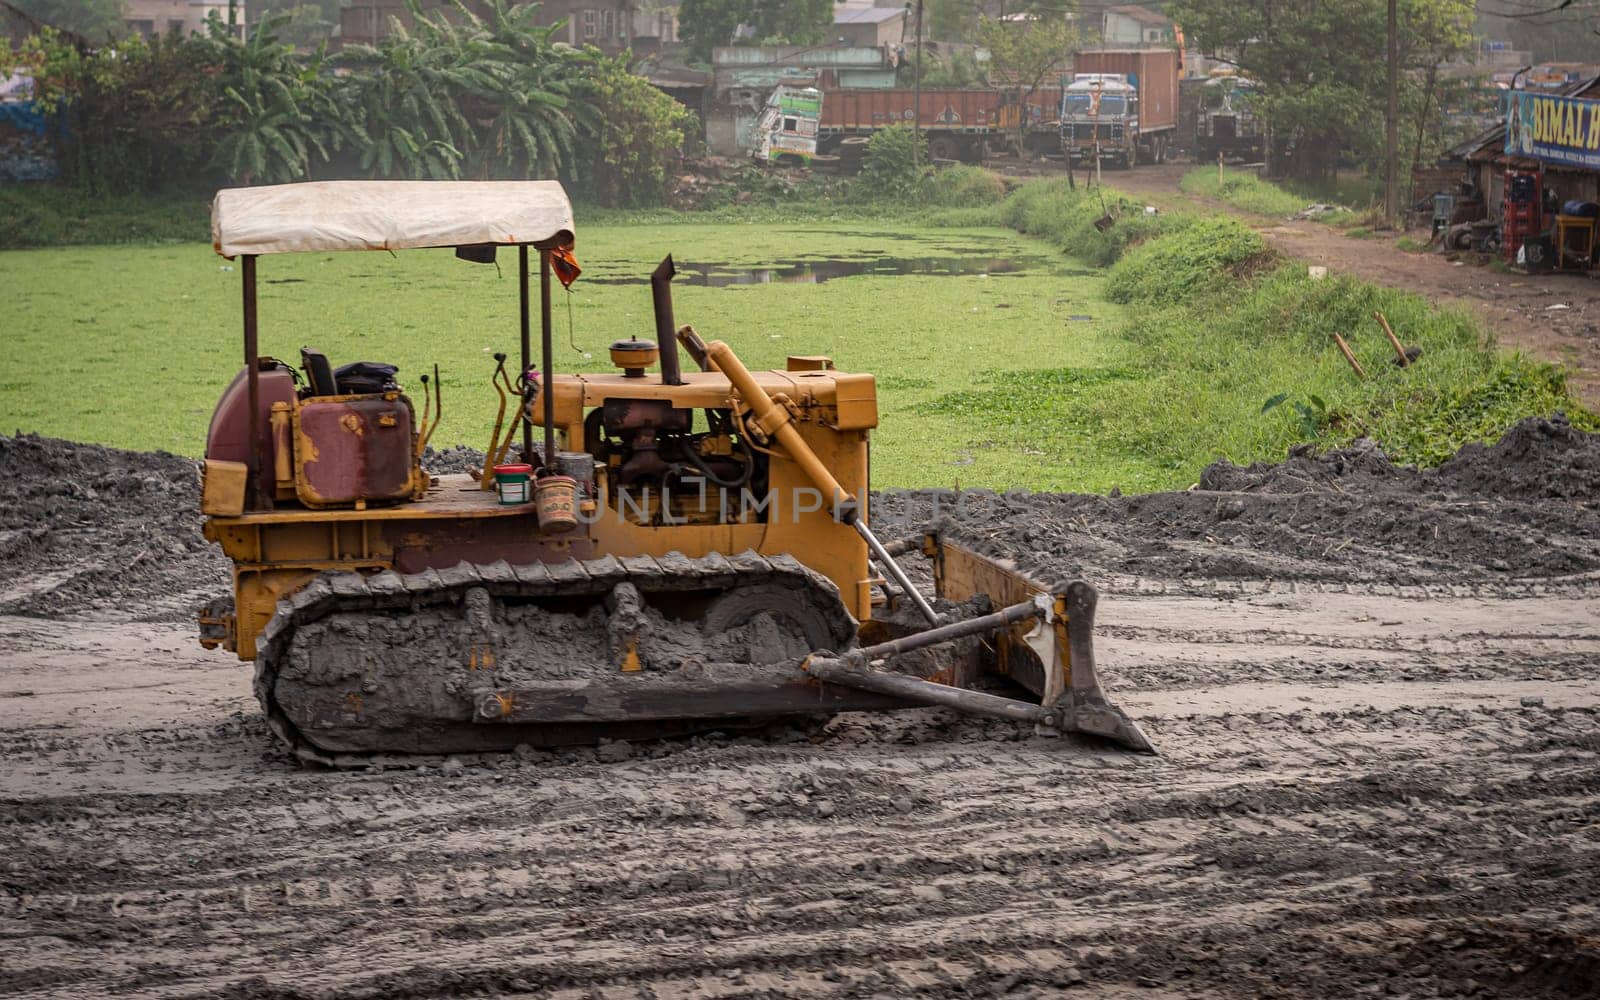 Bulldozer on road a construction site. Bardhaman West Bengal India South Asia Pacific March 23, 2023 by sudiptabhowmick